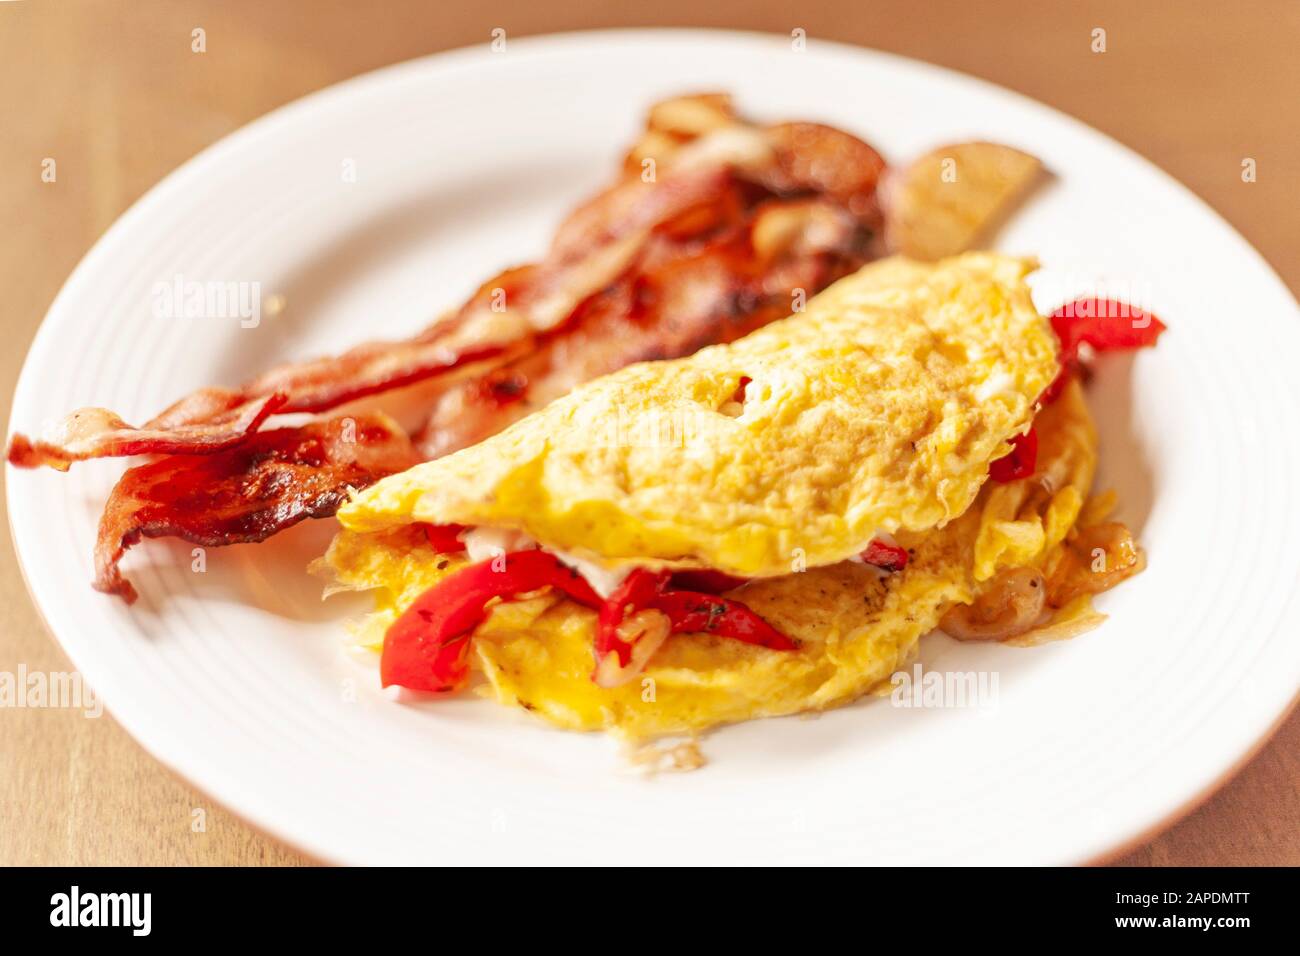 An omelette with sauteed bell peppers, shallots, and sour cream is plated on a white dish with a wooden table as background. Stock Photo